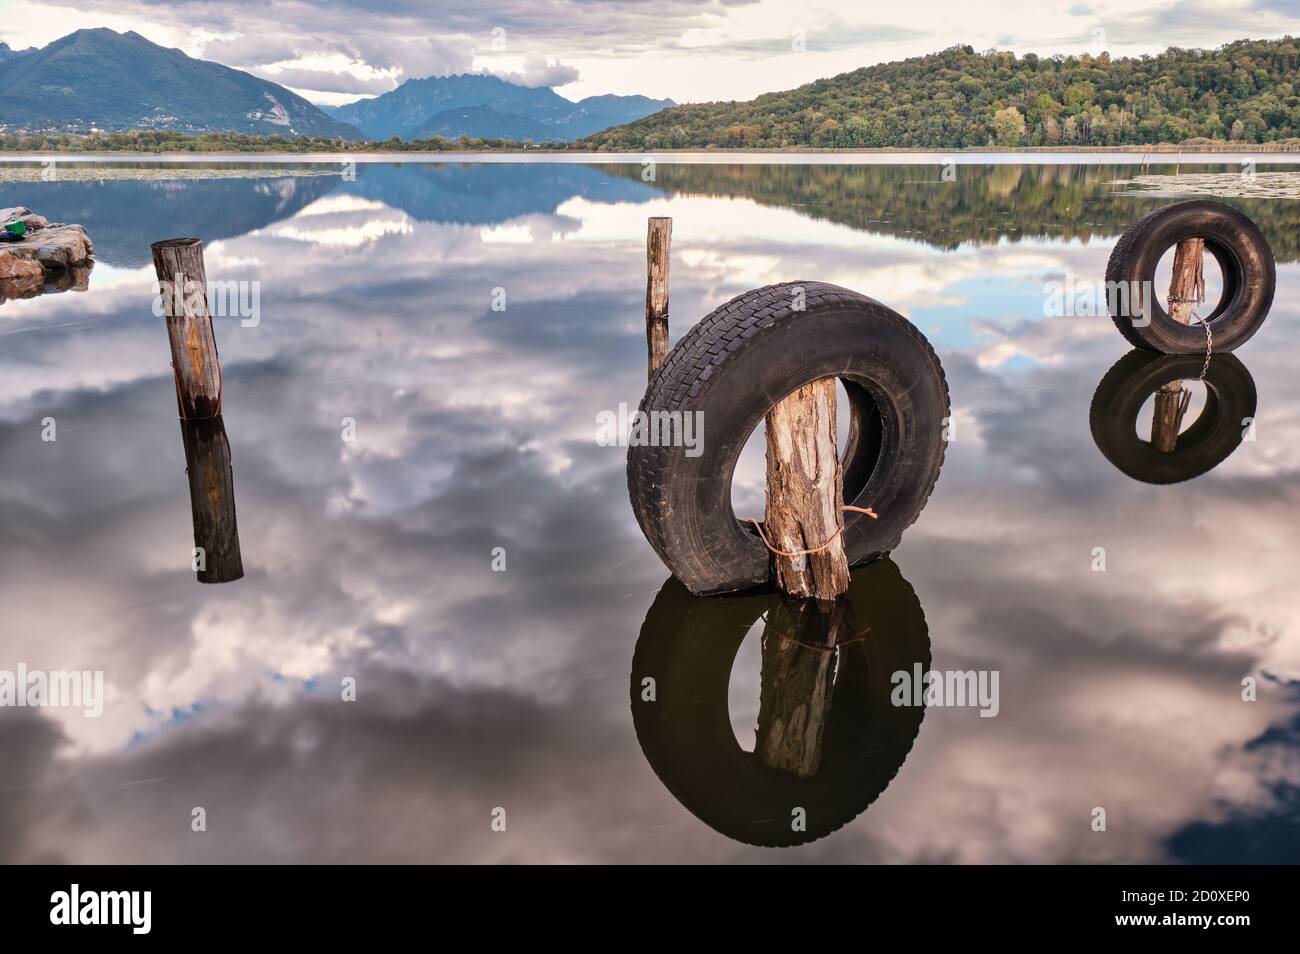 Mountains and tyres reflected in lake water in Autumn, Lago di Alserio, Lombardy, Italy Stock Photo